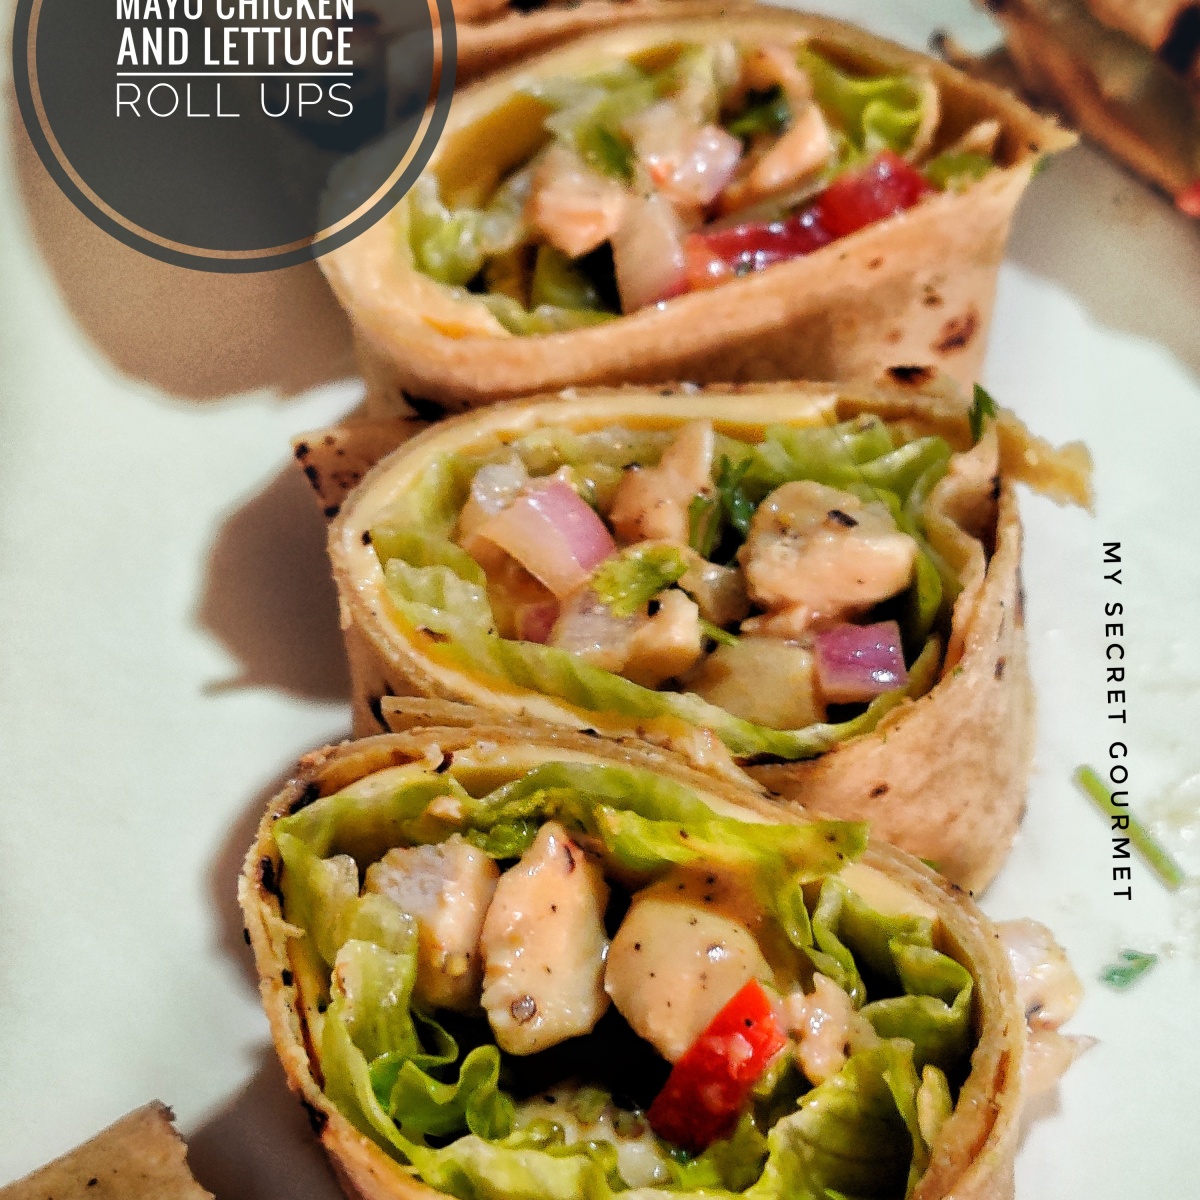 Mayo Chicken and Lettuce Roll Ups